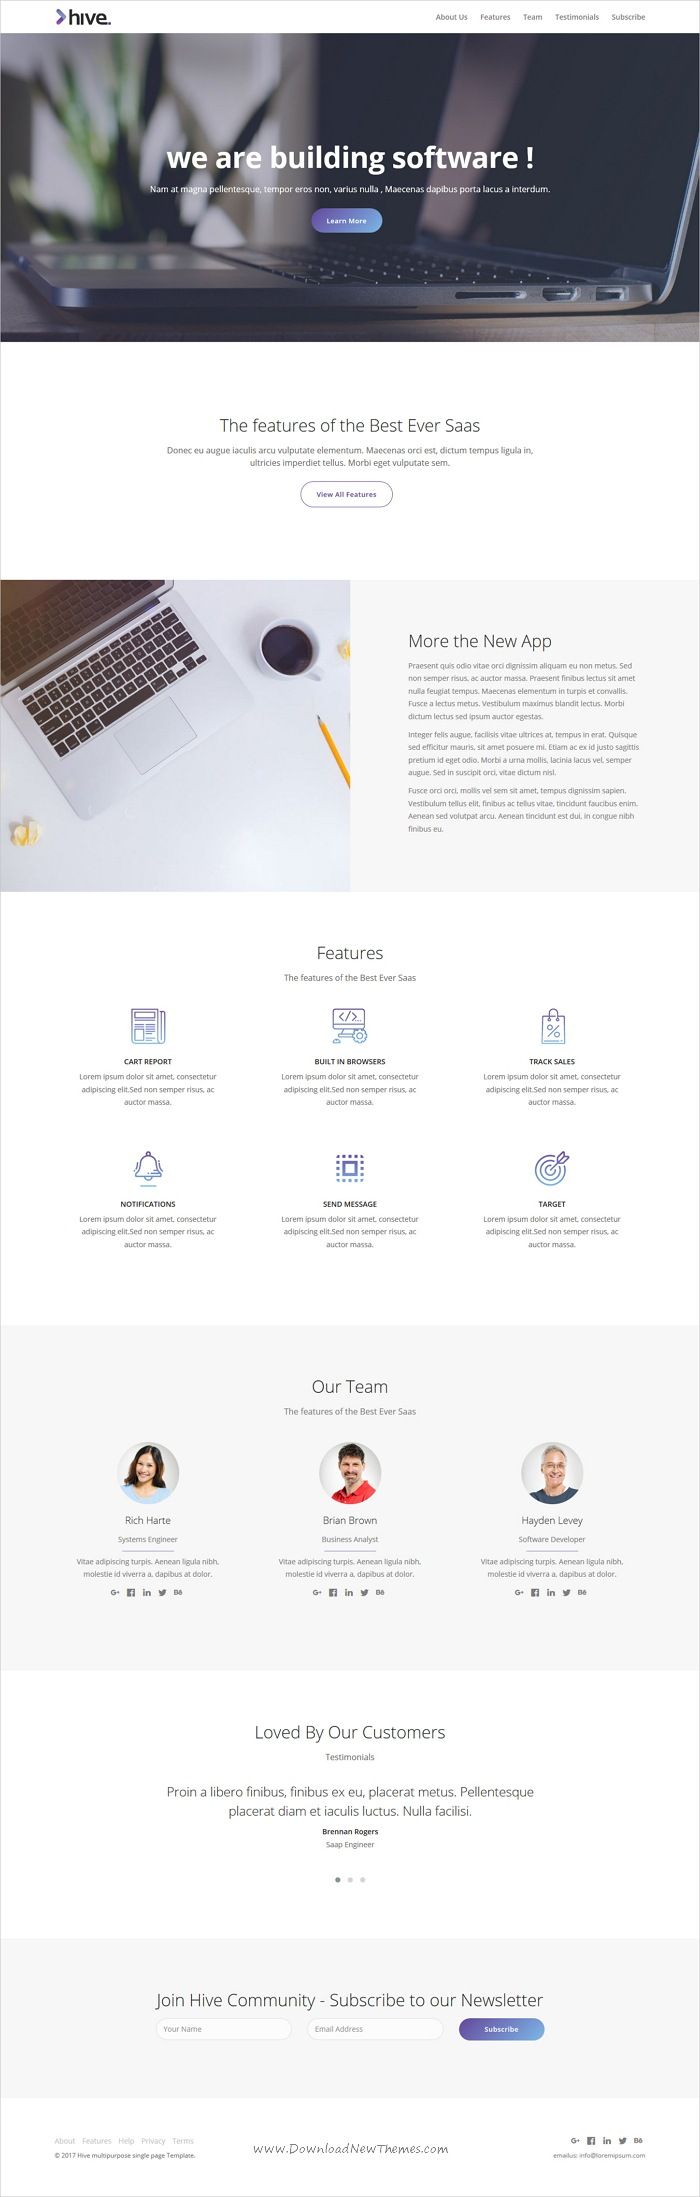 Hive is clean and modern design 3in1 responsive #HTML template for creative #sof...